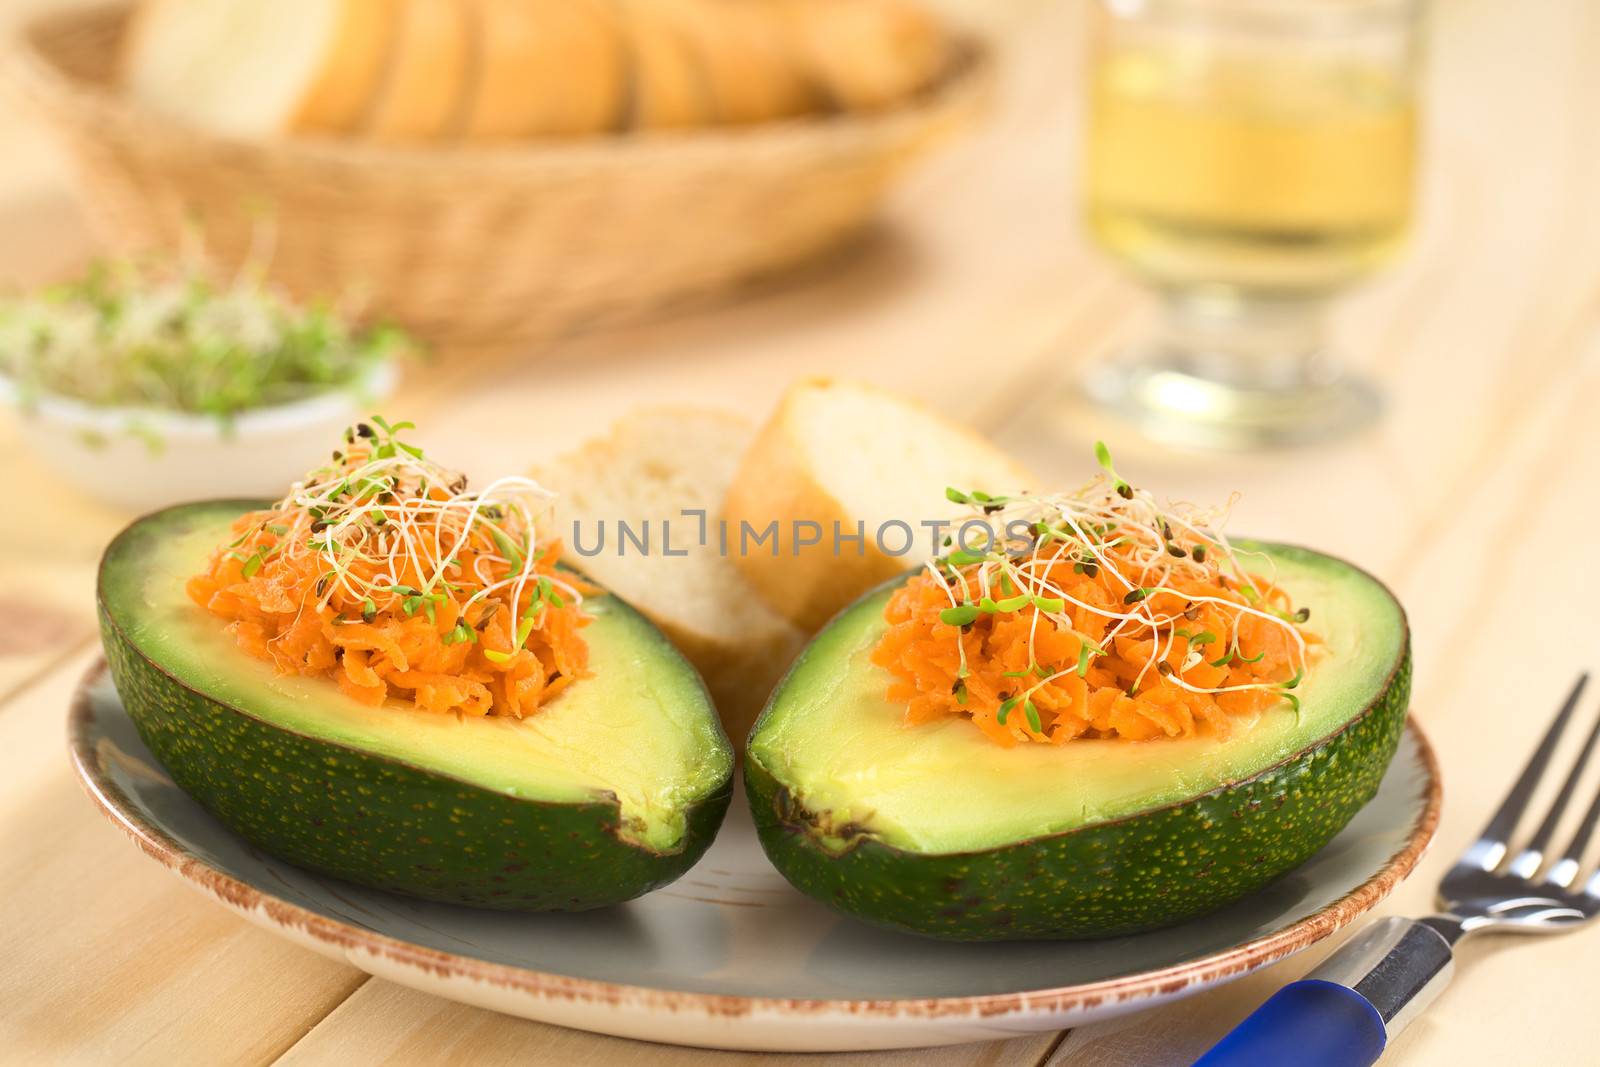 Avocado halves filled with grated carrot and sprinkled with alfalfa sprouts served on plate with baguette slices (Selective Focus, Focus on the front of the grated carrot) 